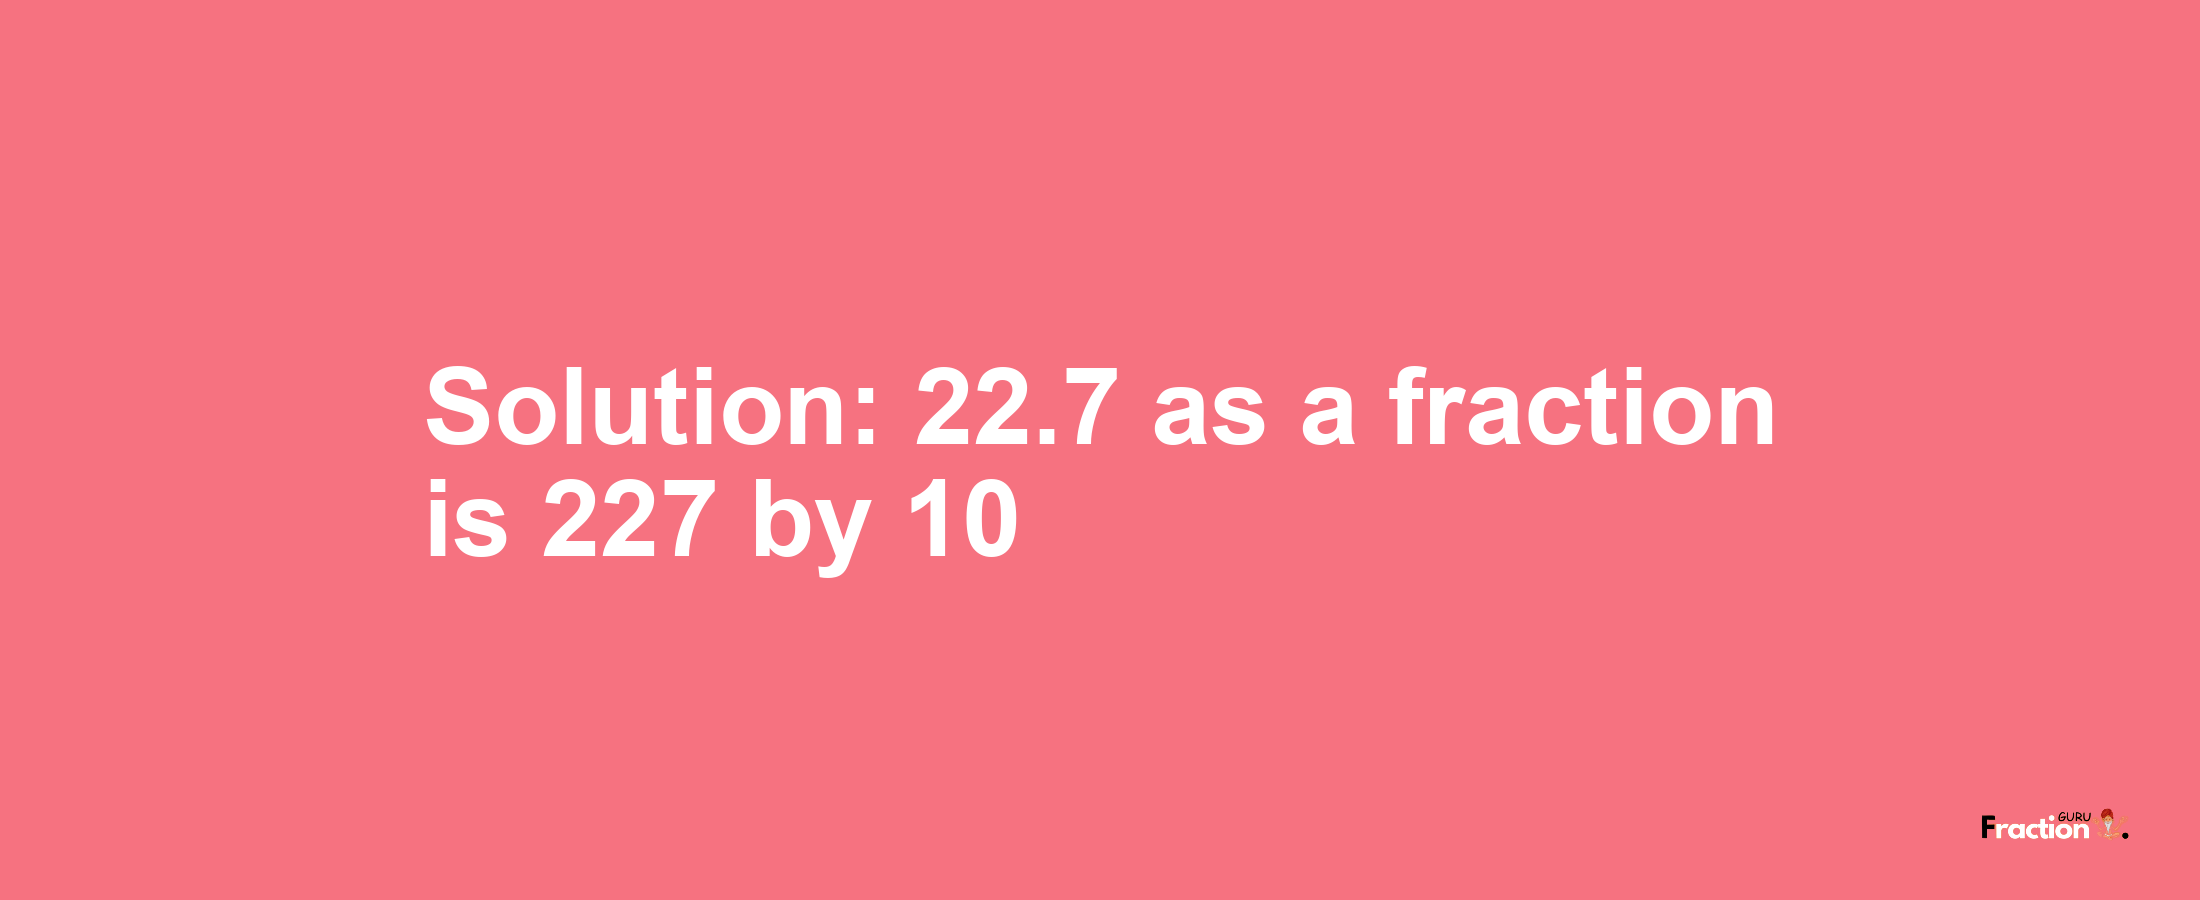 Solution:22.7 as a fraction is 227/10